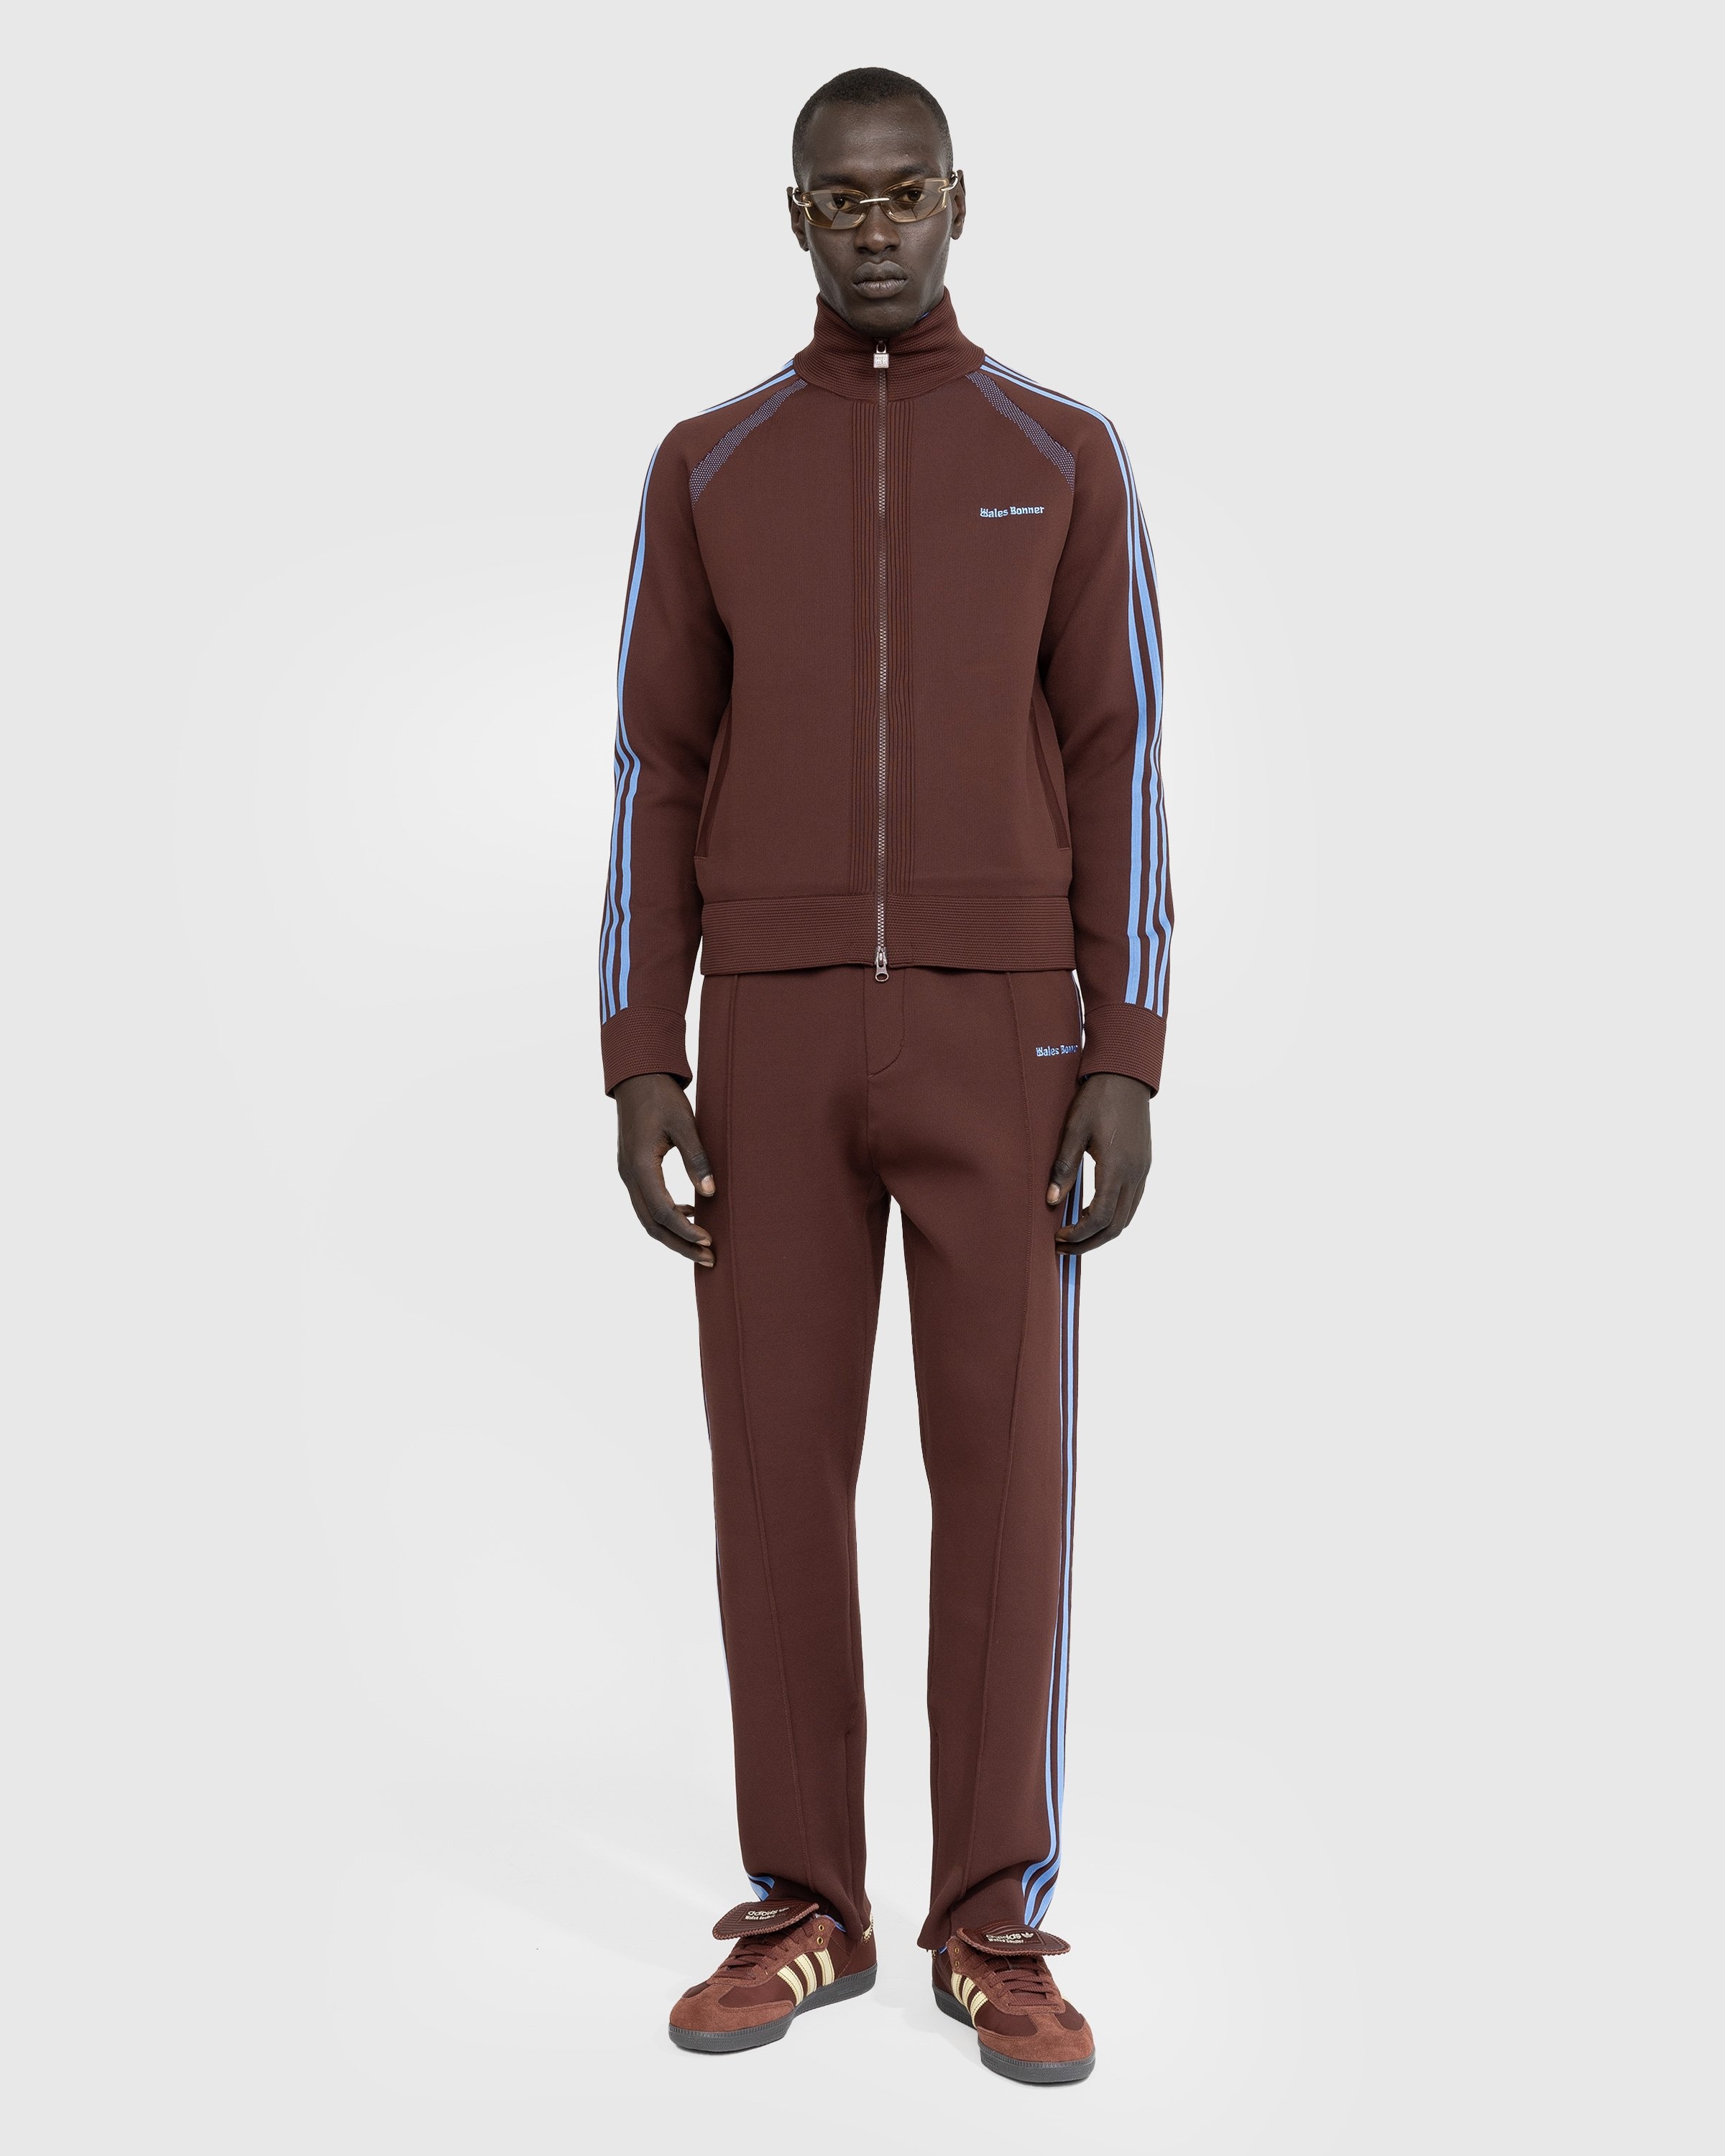 Adidas x Wales Bonner – Knit Track Pant Mystery Brown - Pants - Brown - Image 3